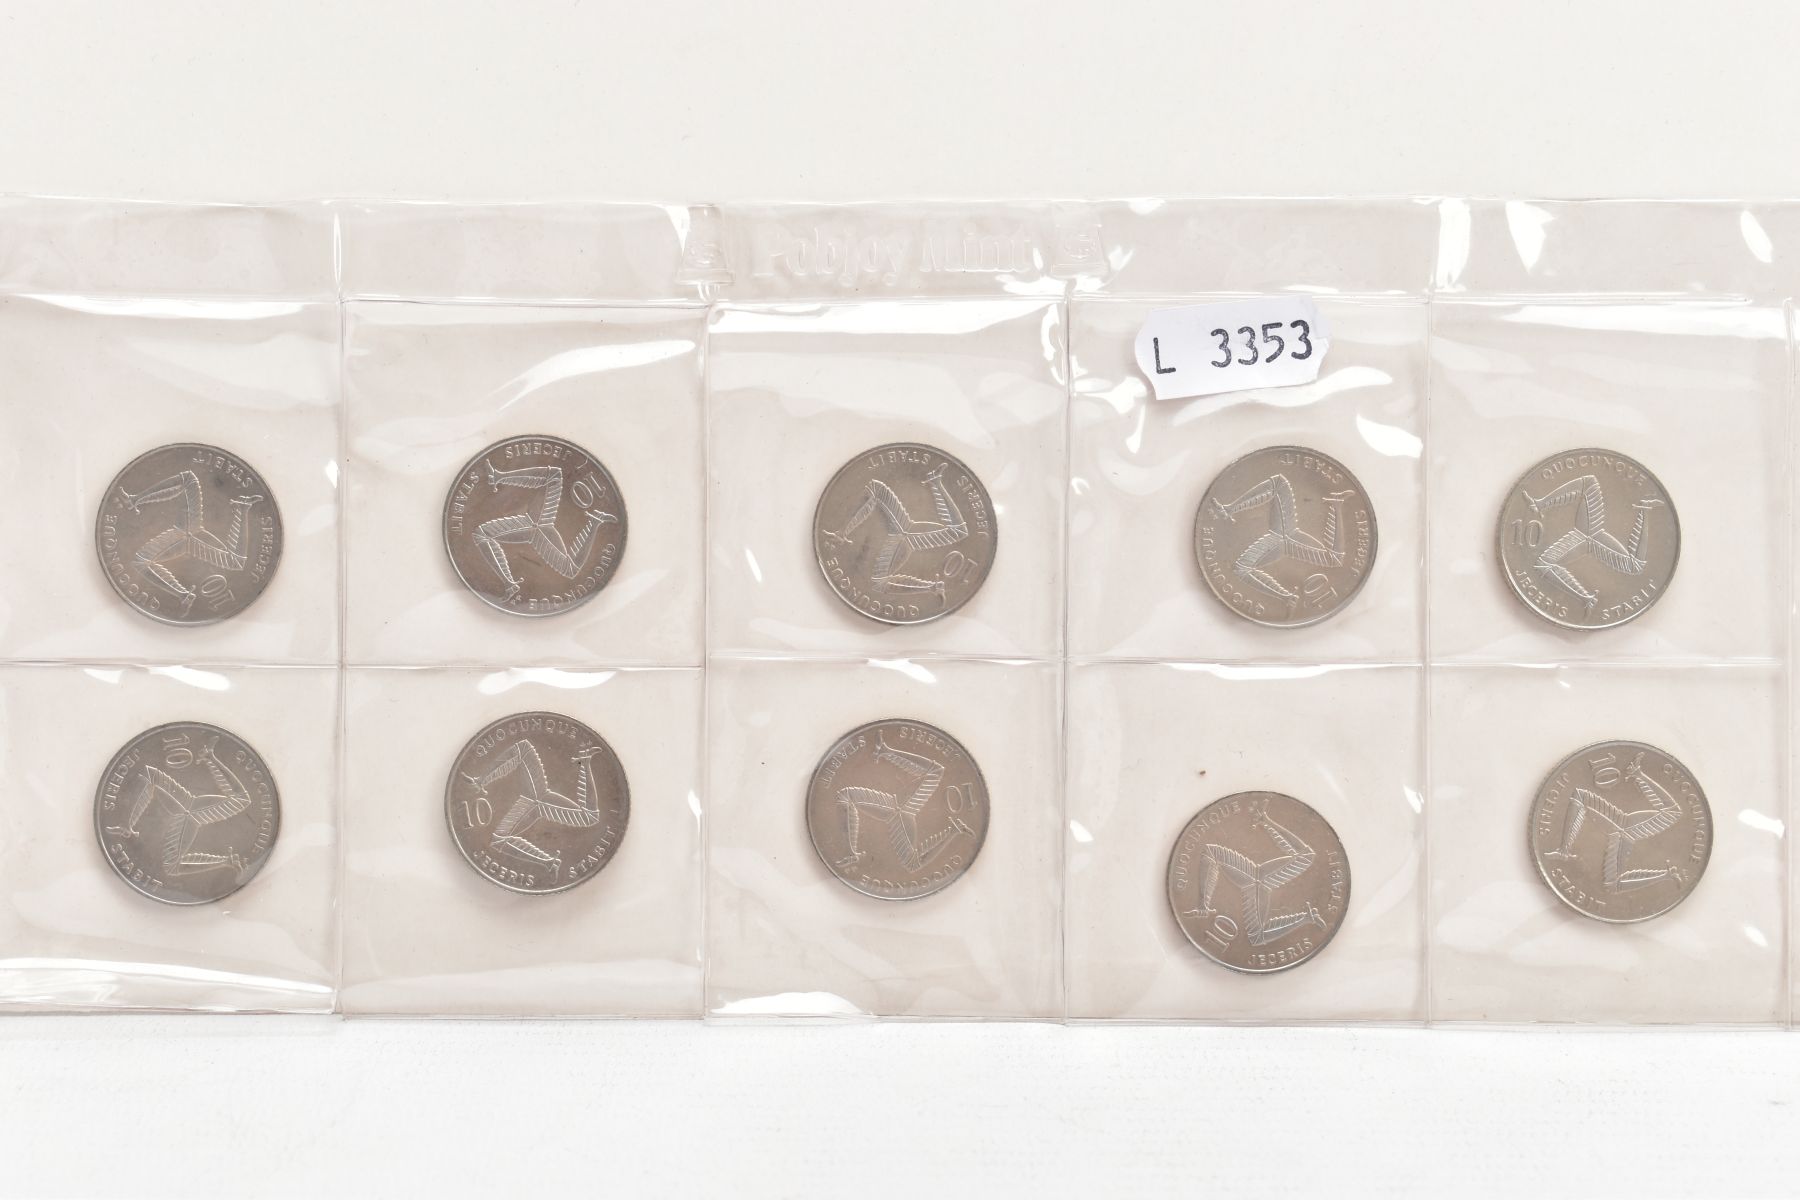 A RARE AND UNUSUAL GROUP OF (10) 10P 1992 TRISKELION COINS, these new design ten pence coins